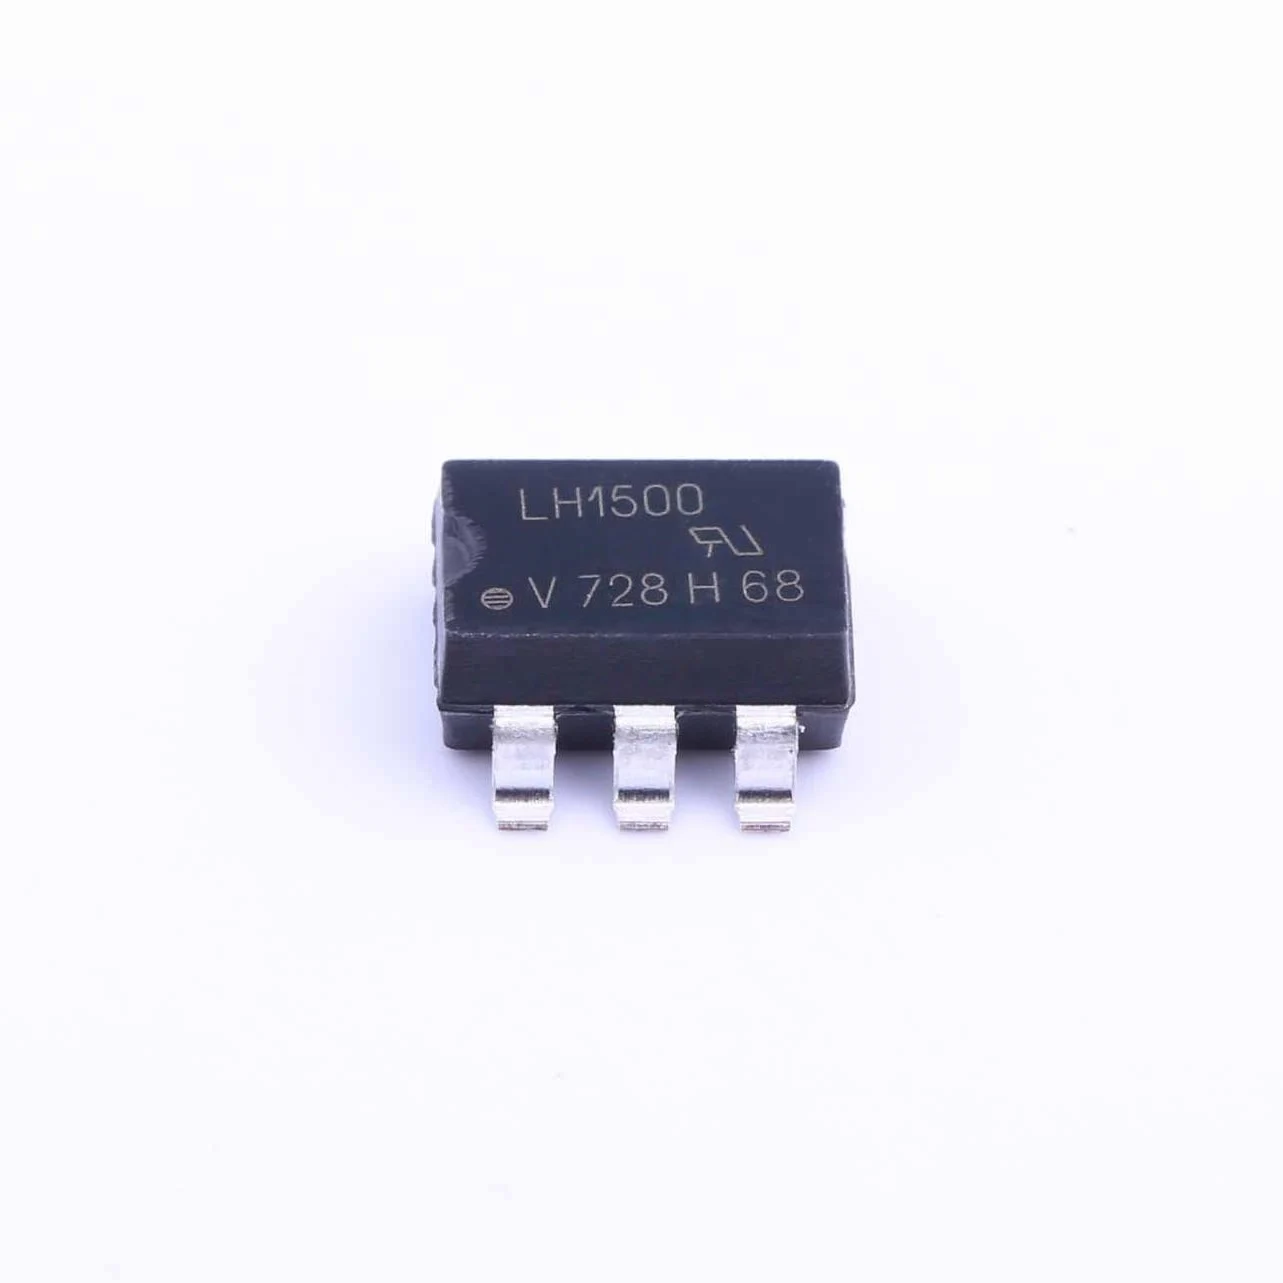 

LH1500AAB (LH1500AAB) Solid State Relay-MOS output (PhotoMOS)